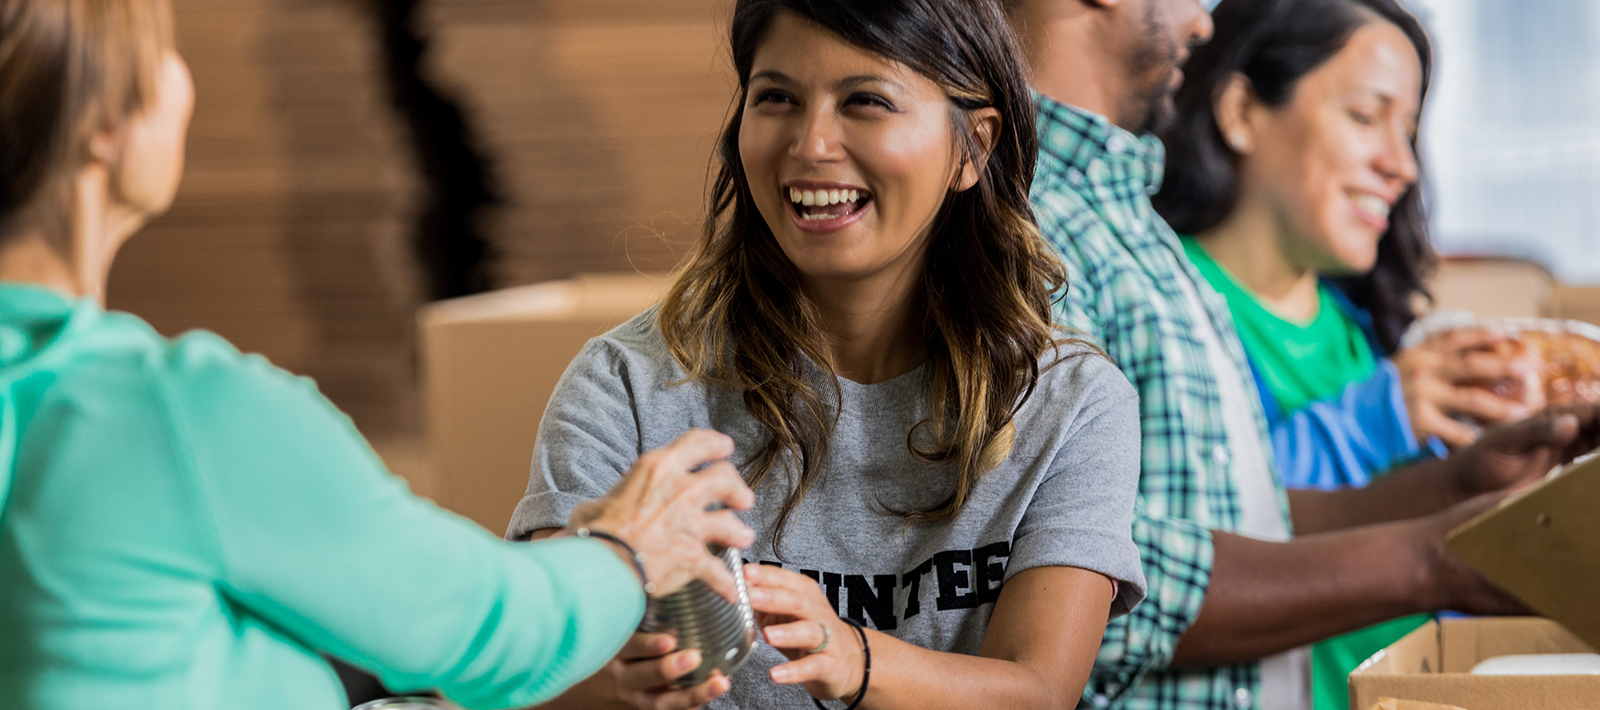 A woman smiles while working with other volunteers at a local food bank. They are packing cardboard boxes with canned goods to be sent to people in need.